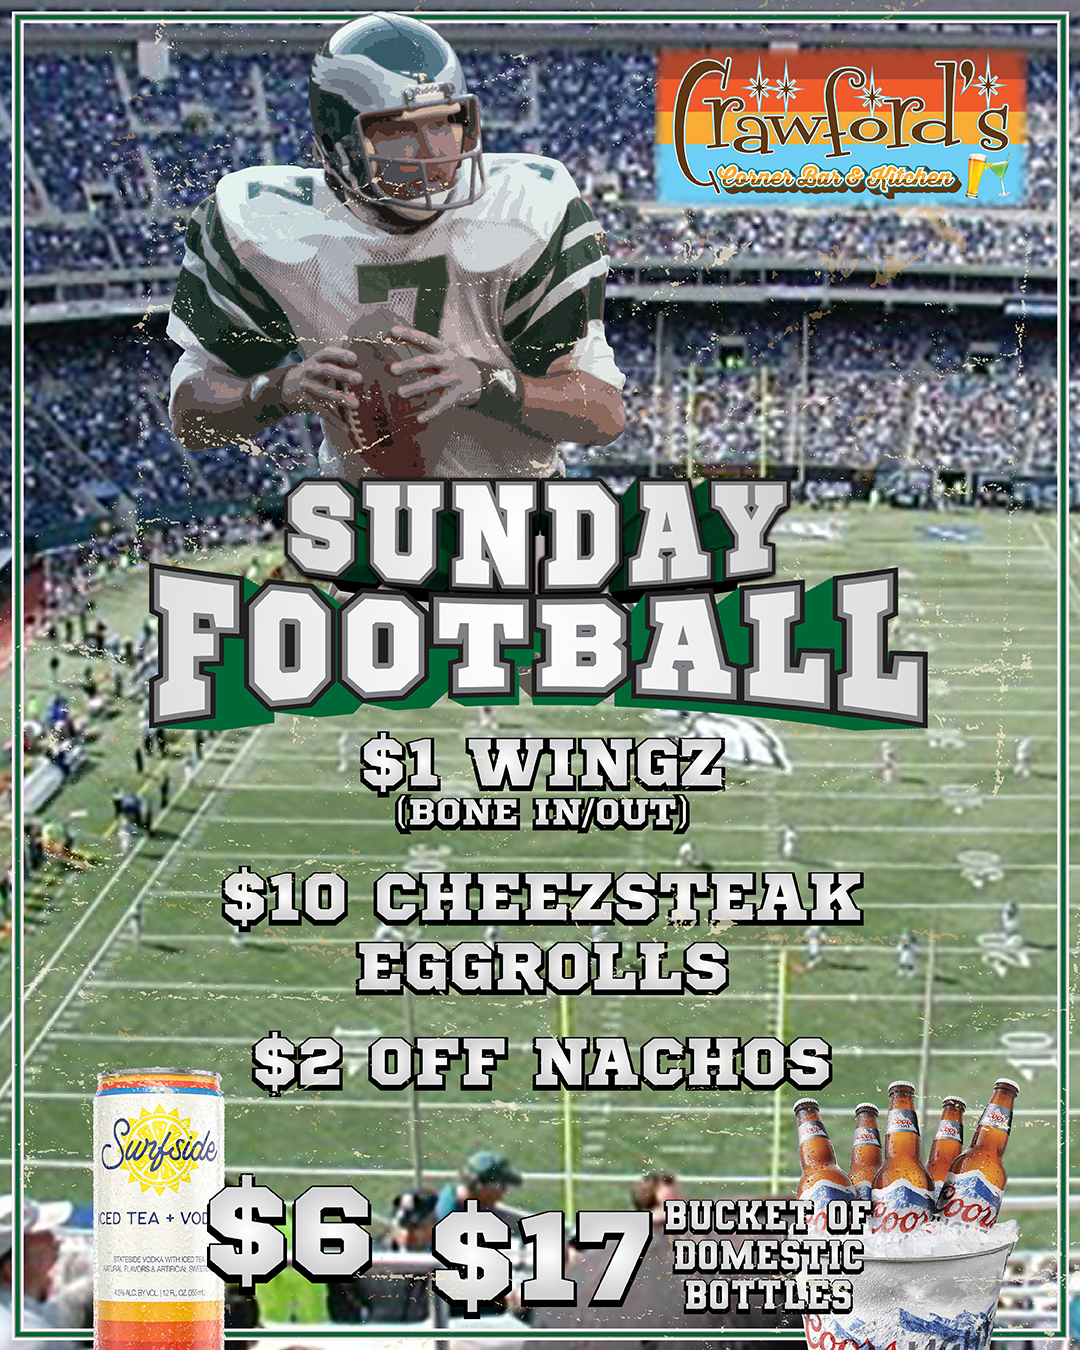 A flyer for a sunday football game.